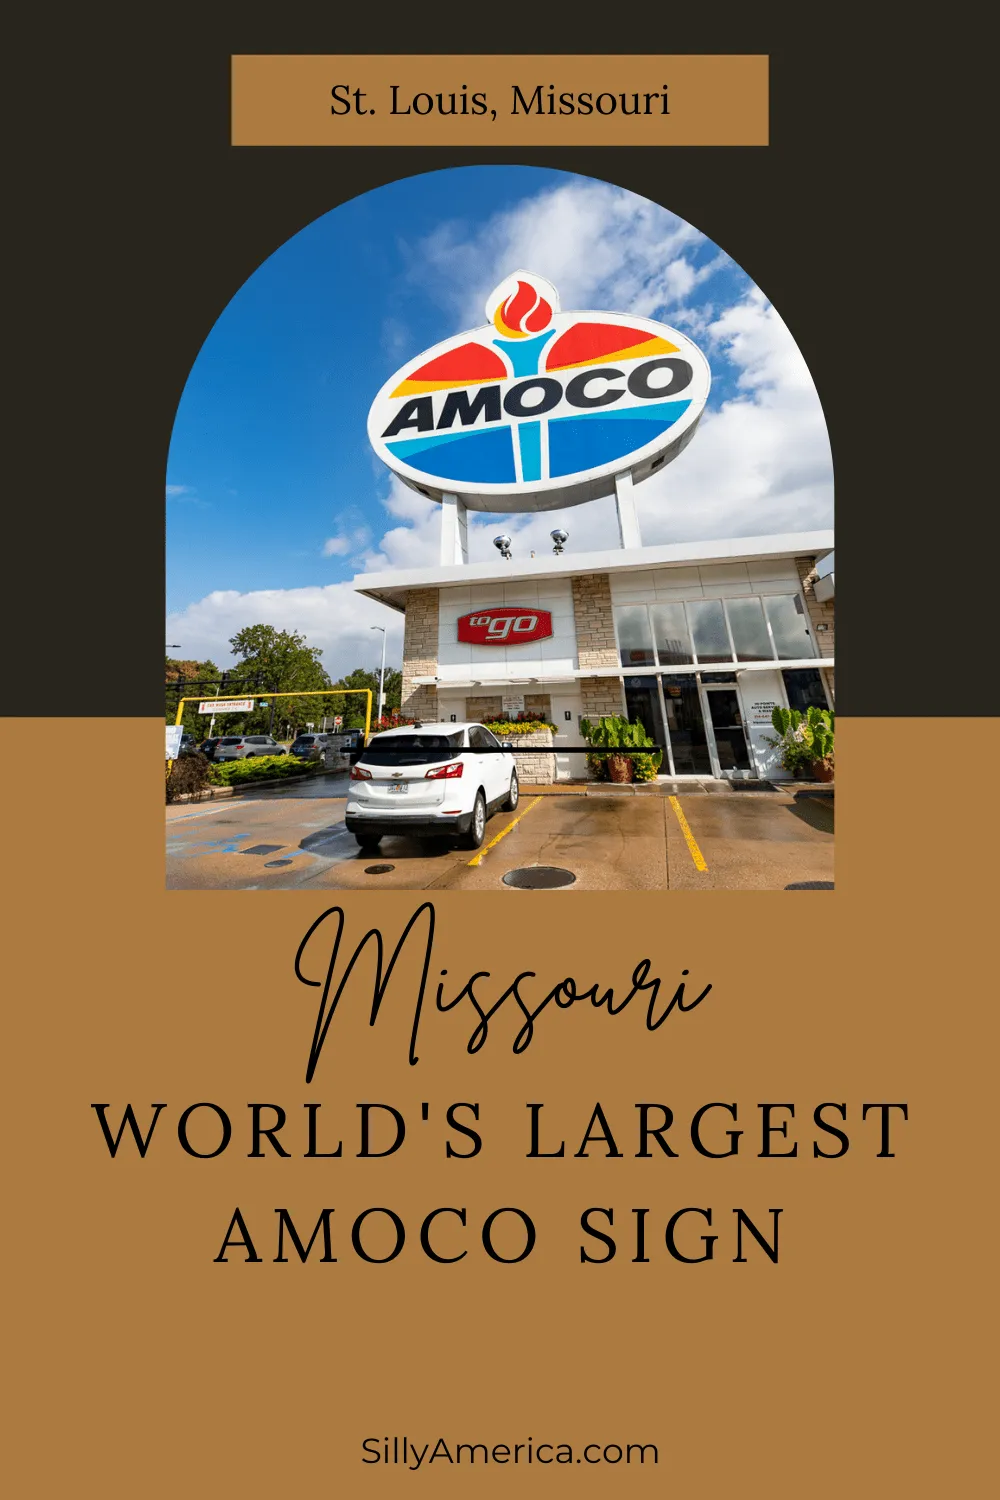 Find the World's Largest Amoco Sign at Stevenson's Hi-Pointe Amoco in St. Louis, Missouri.  #RoadTrips #RoadTripStop #Route66 #Route66RoadTrip #MissouriRoute66 #Missouri #MissouriRoadTrip #MissouriRoadsideAttractions #RoadsideAttractions #RoadsideAttraction #RoadsideAmerica #RoadTrip